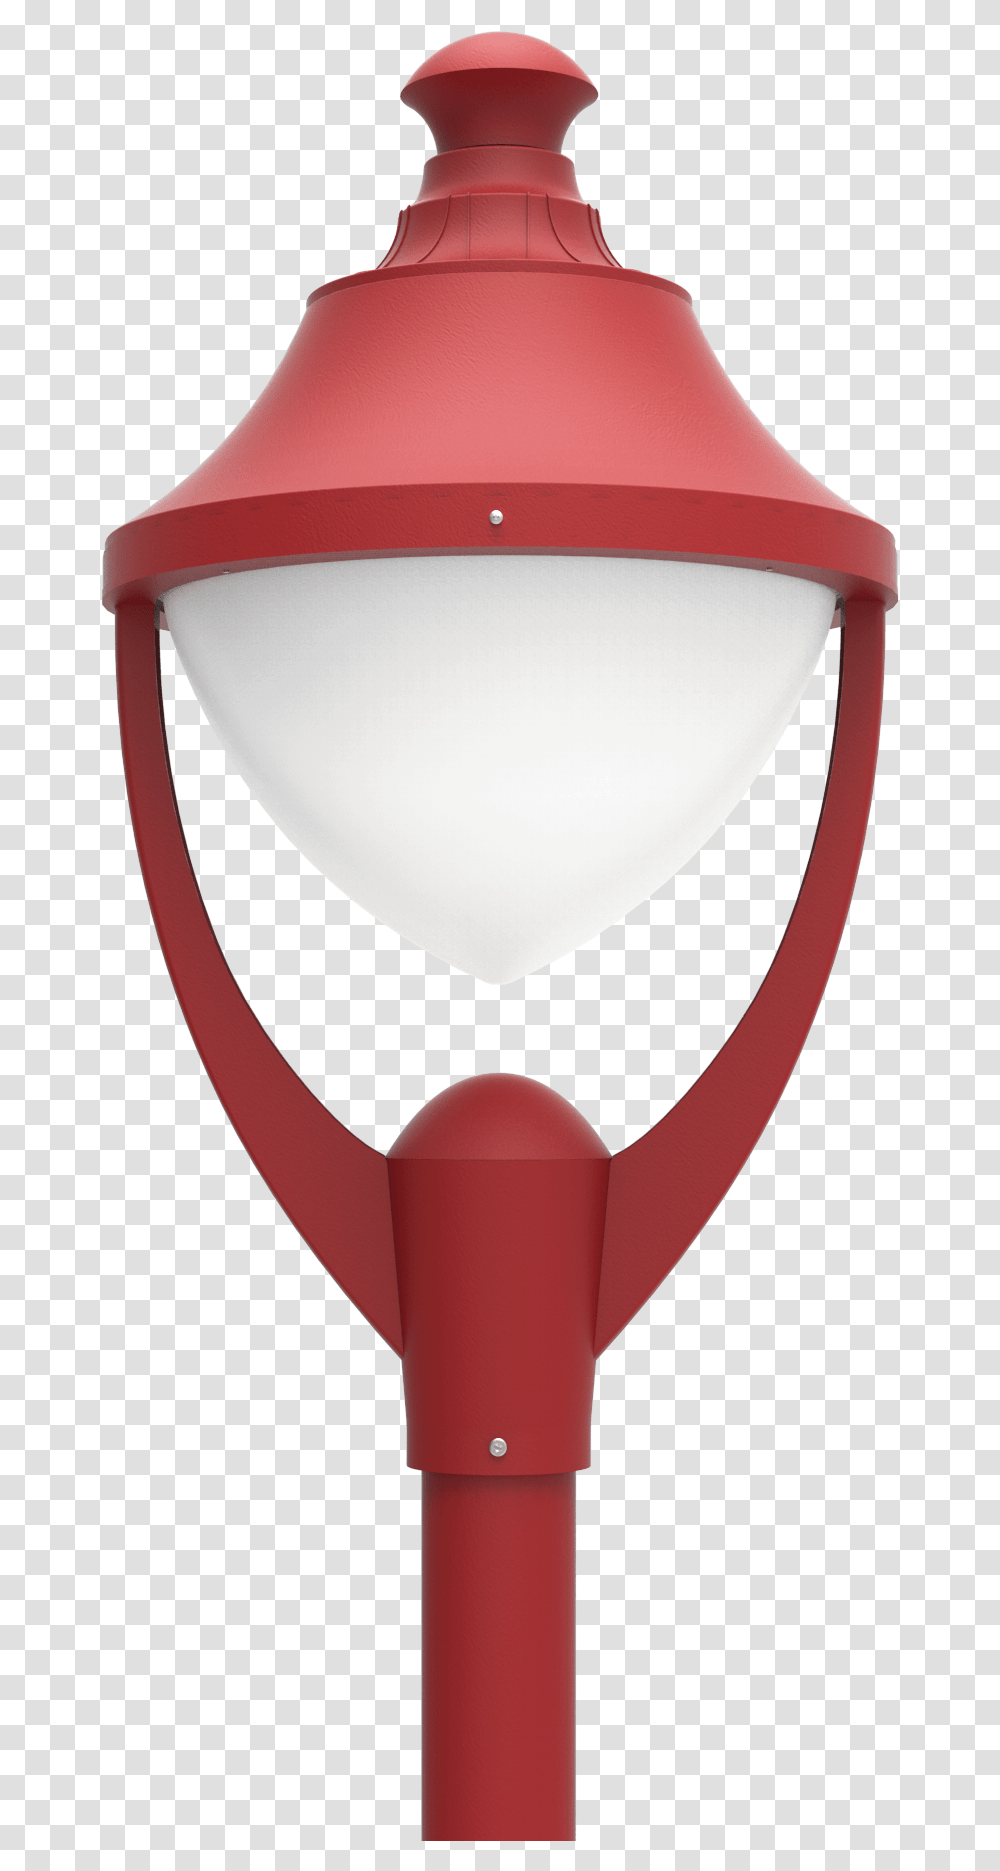 Classic Design Led Post Light Fixtures Pt Street Light Post Top Light Red, Lamp, Glass, Red Wine, Alcohol Transparent Png